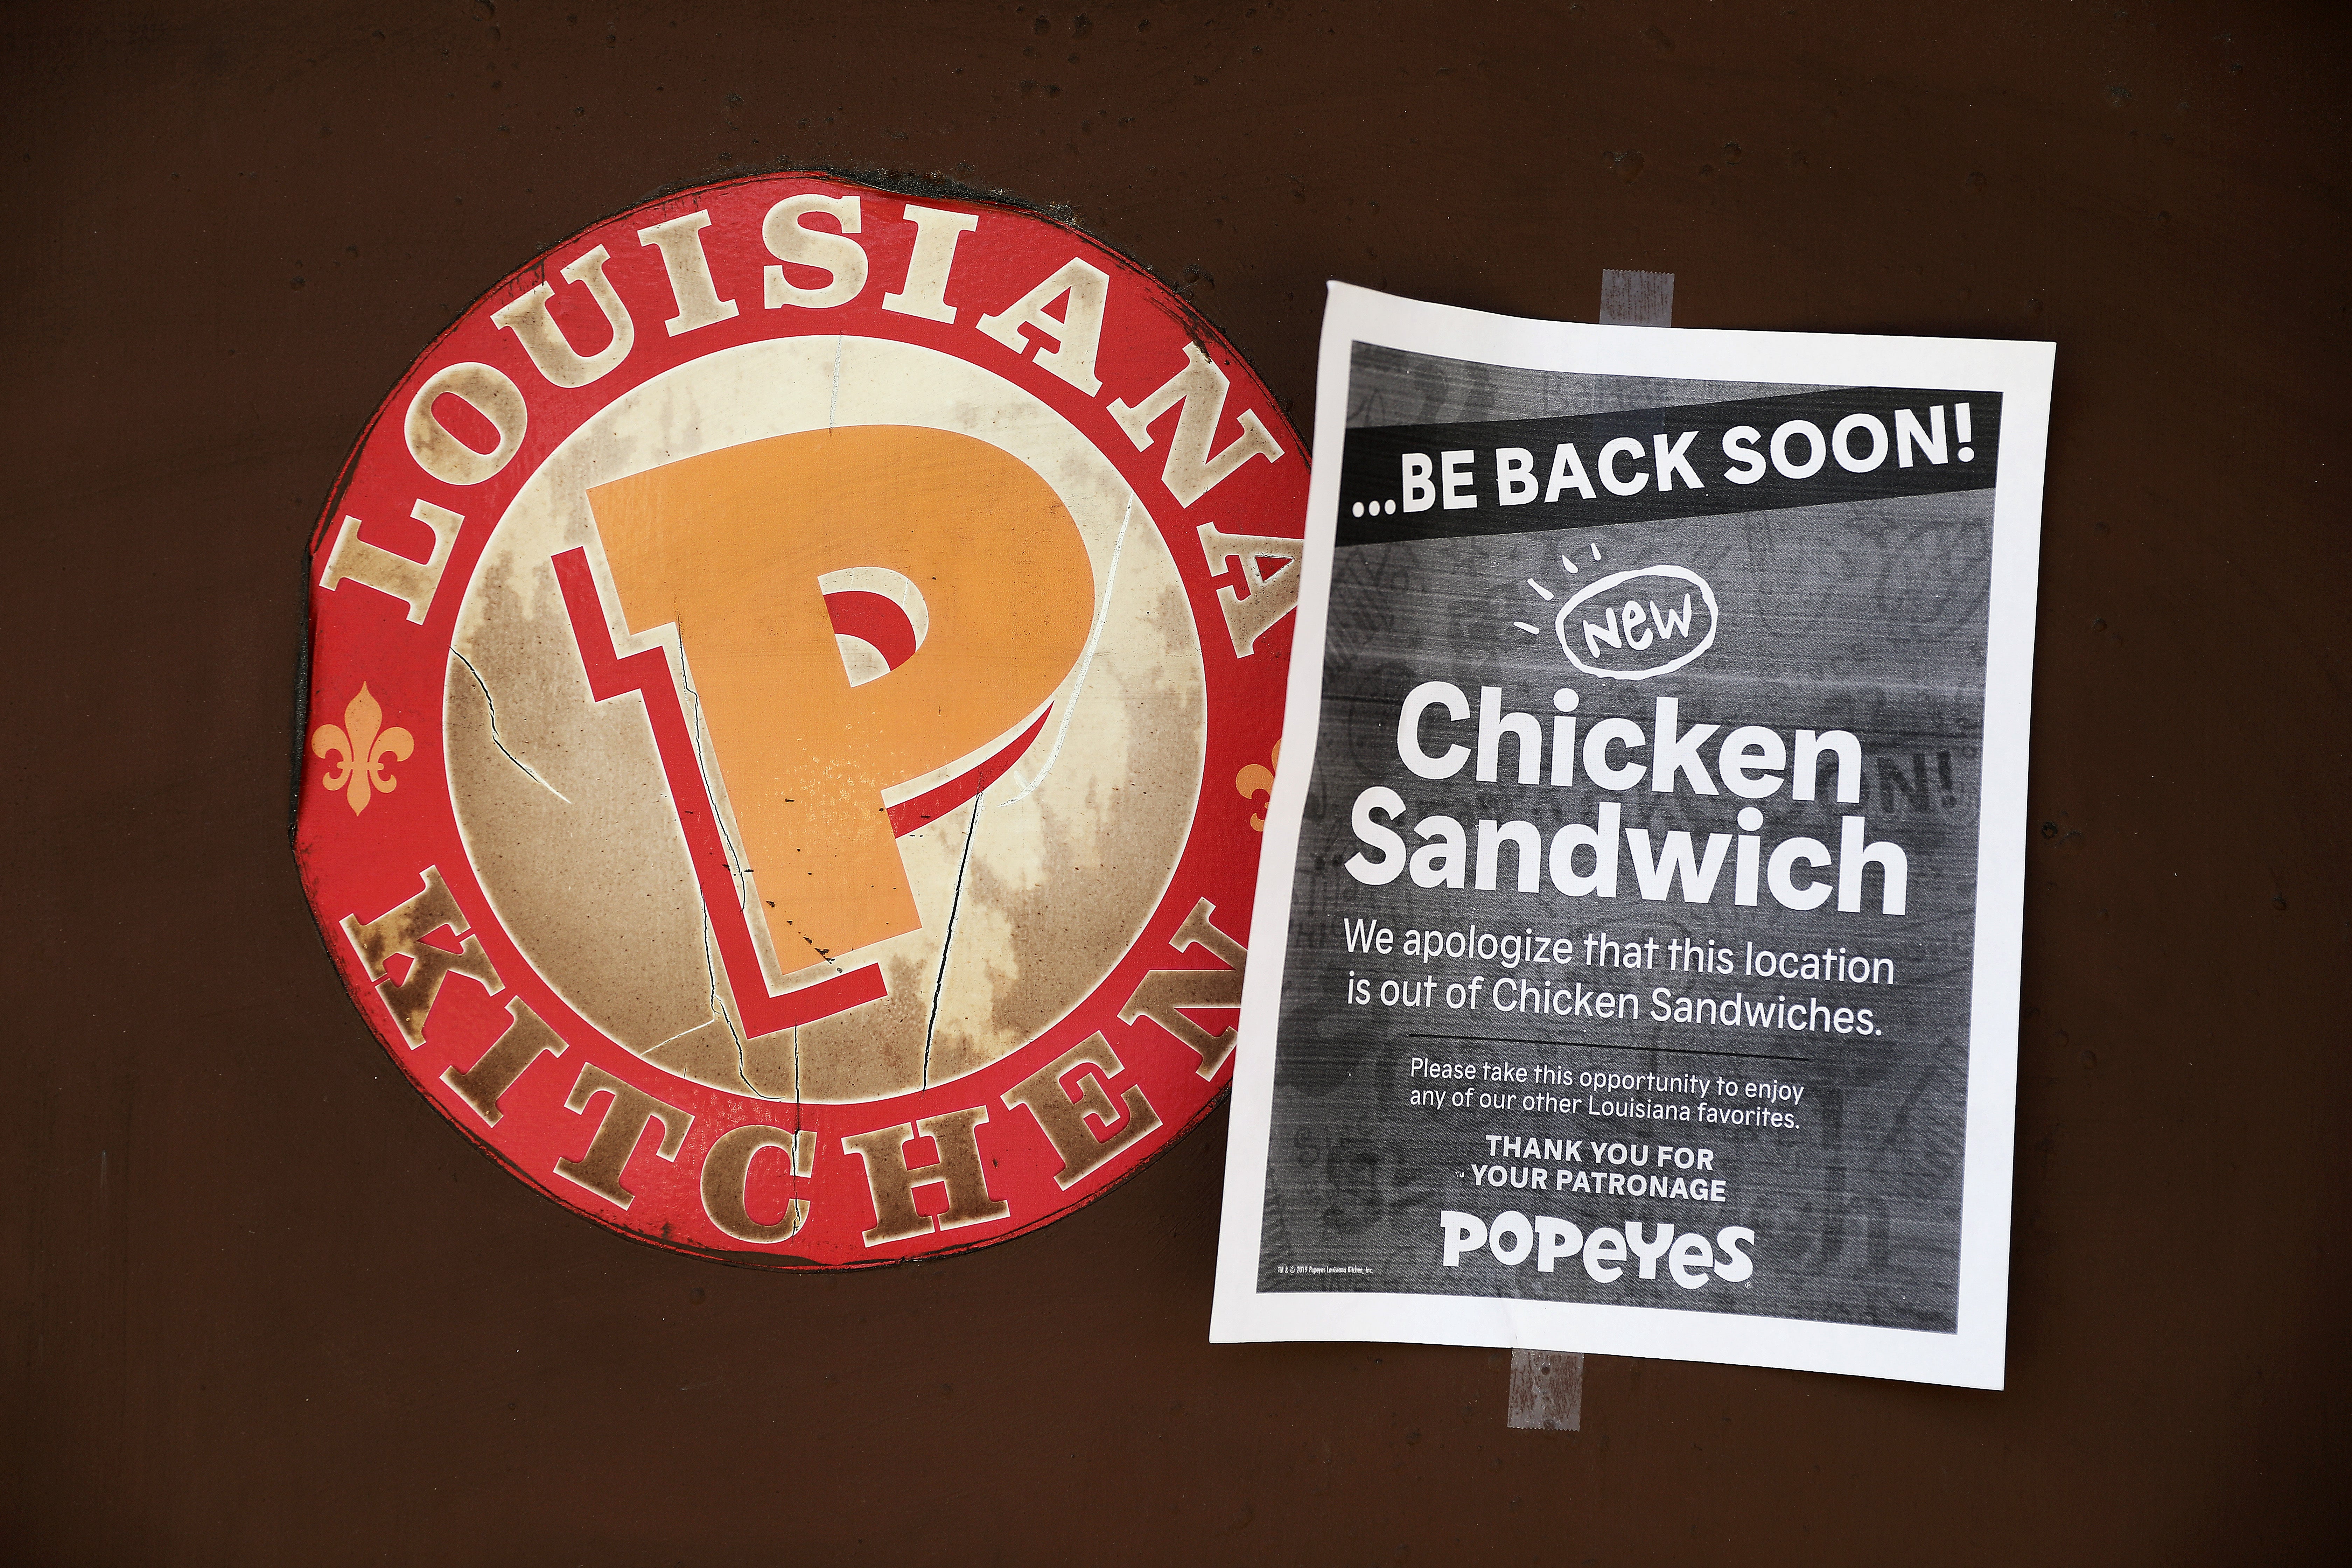 Customer Pulled Gun In Popeyes After Being Told Chicken Sandwiches Were Sold Out